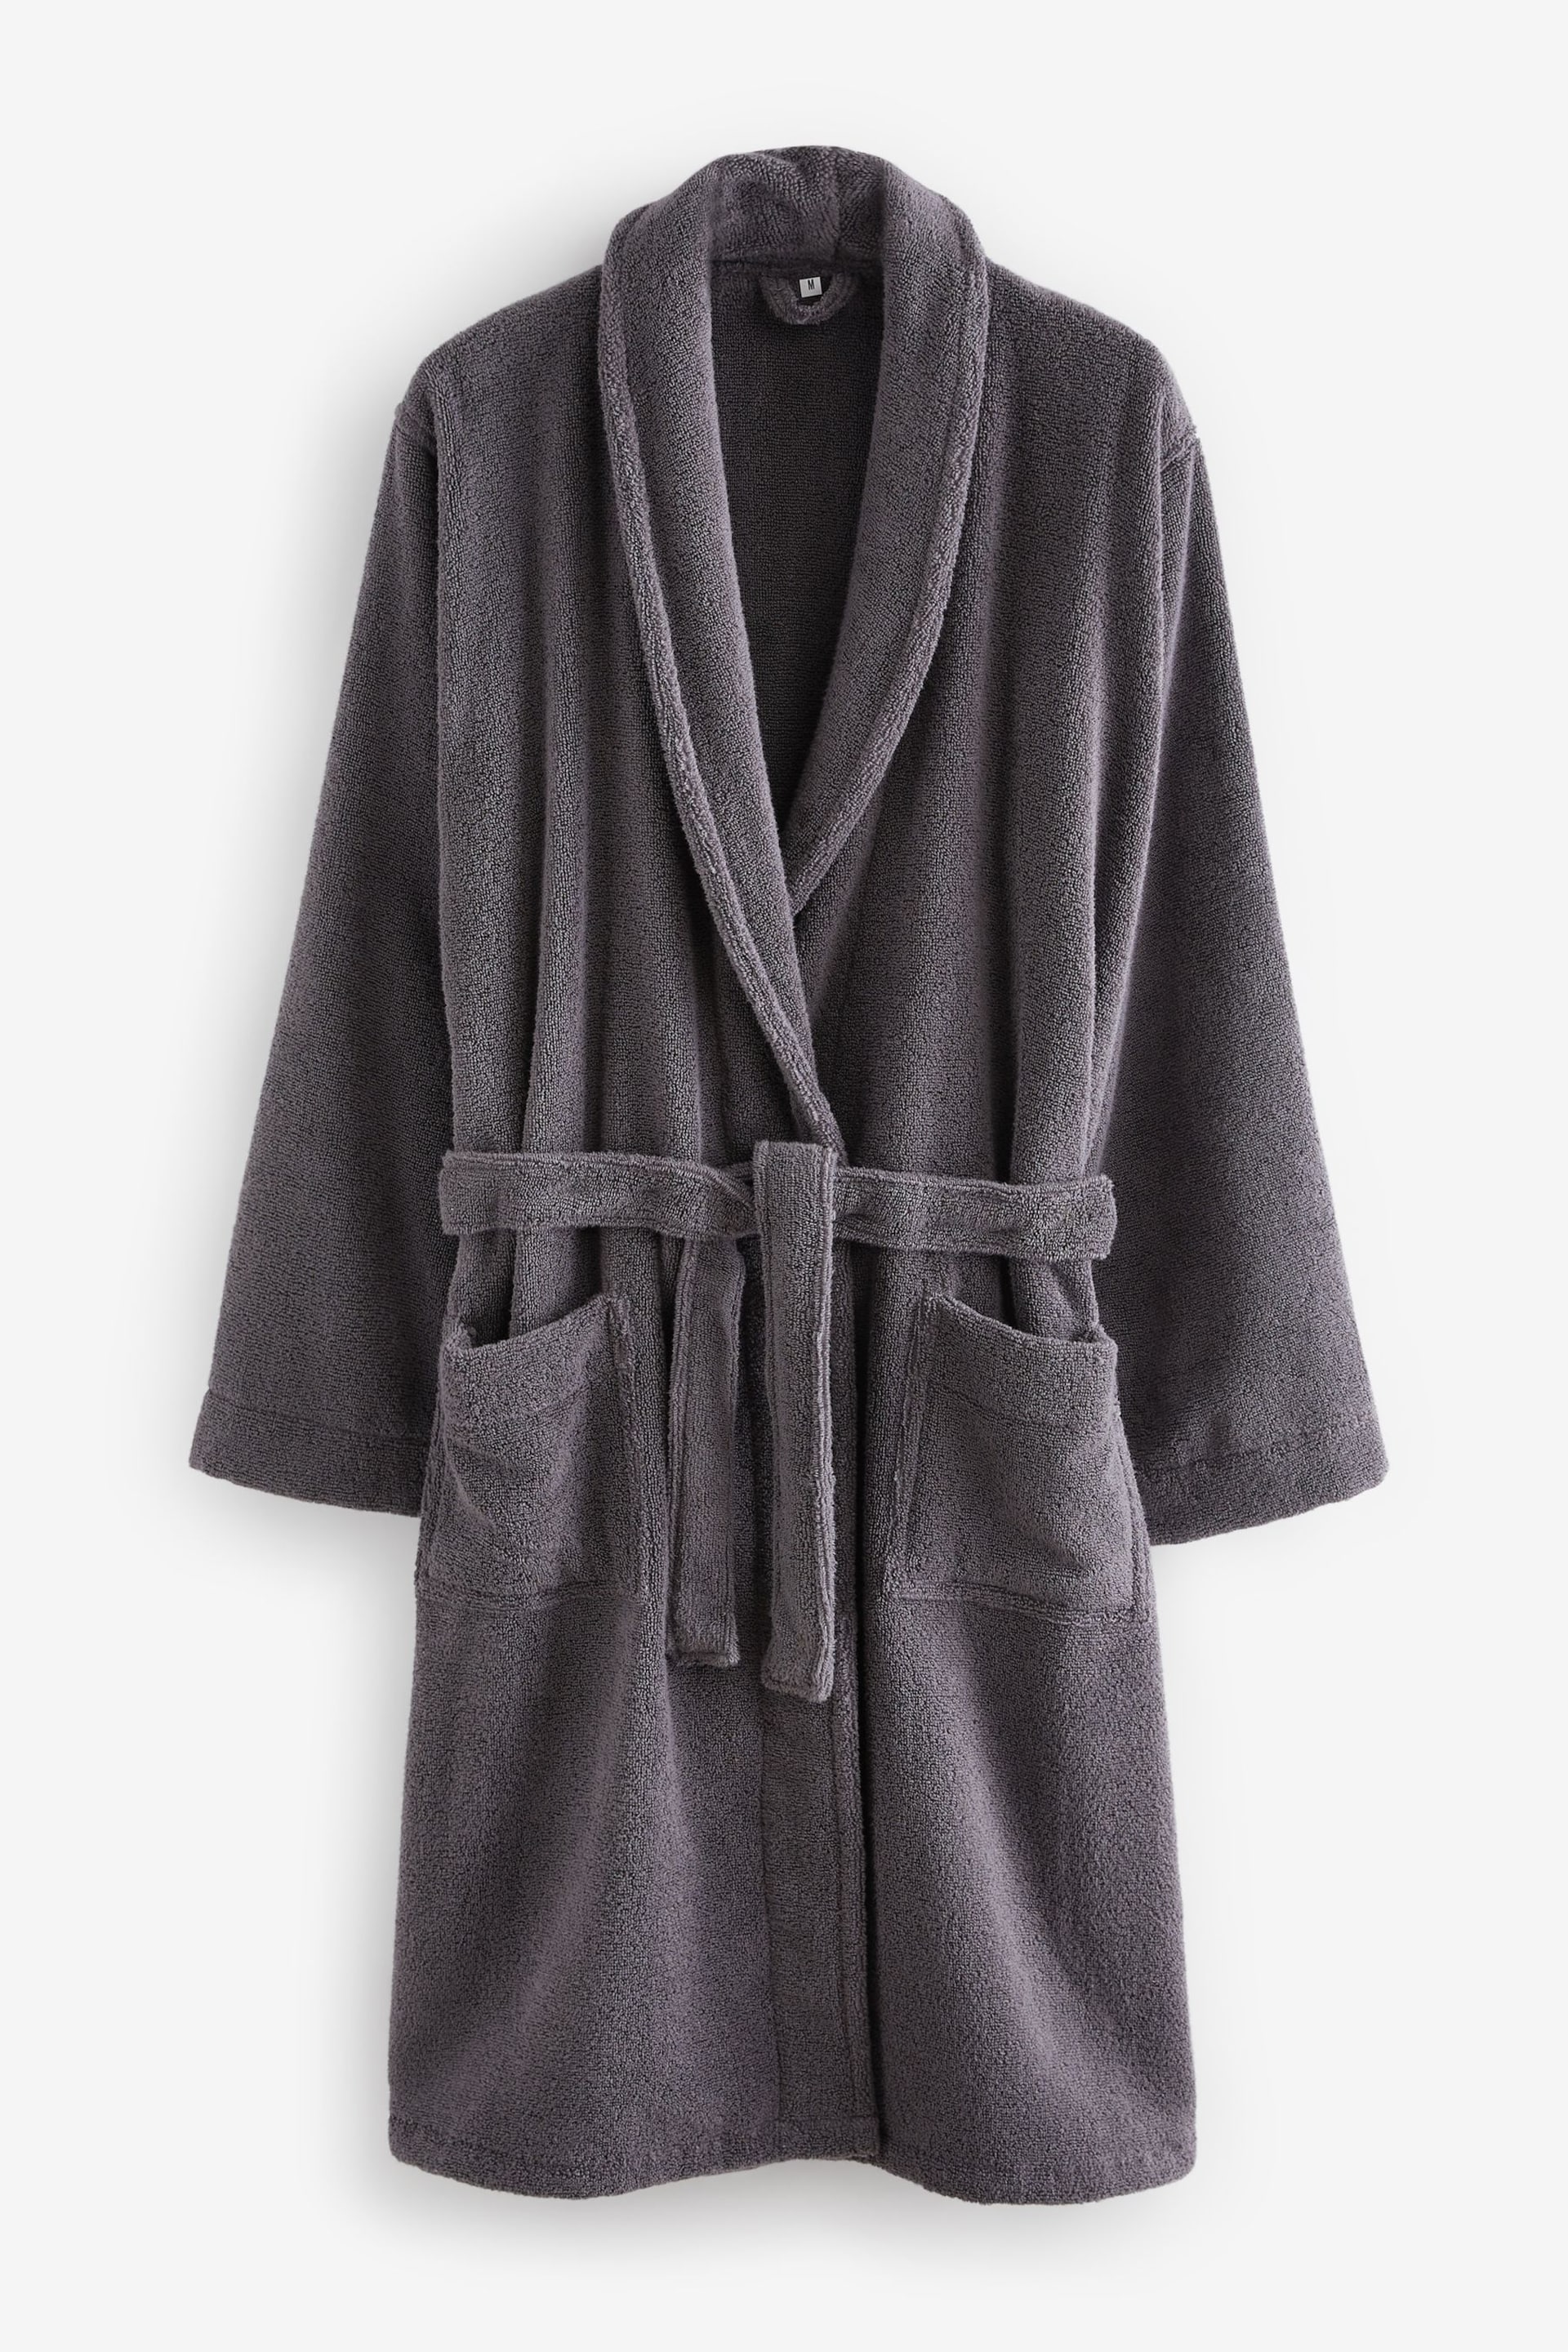 Charcoal Grey Signature Pure Cotton Towelling Dressing Gown - Image 1 of 2